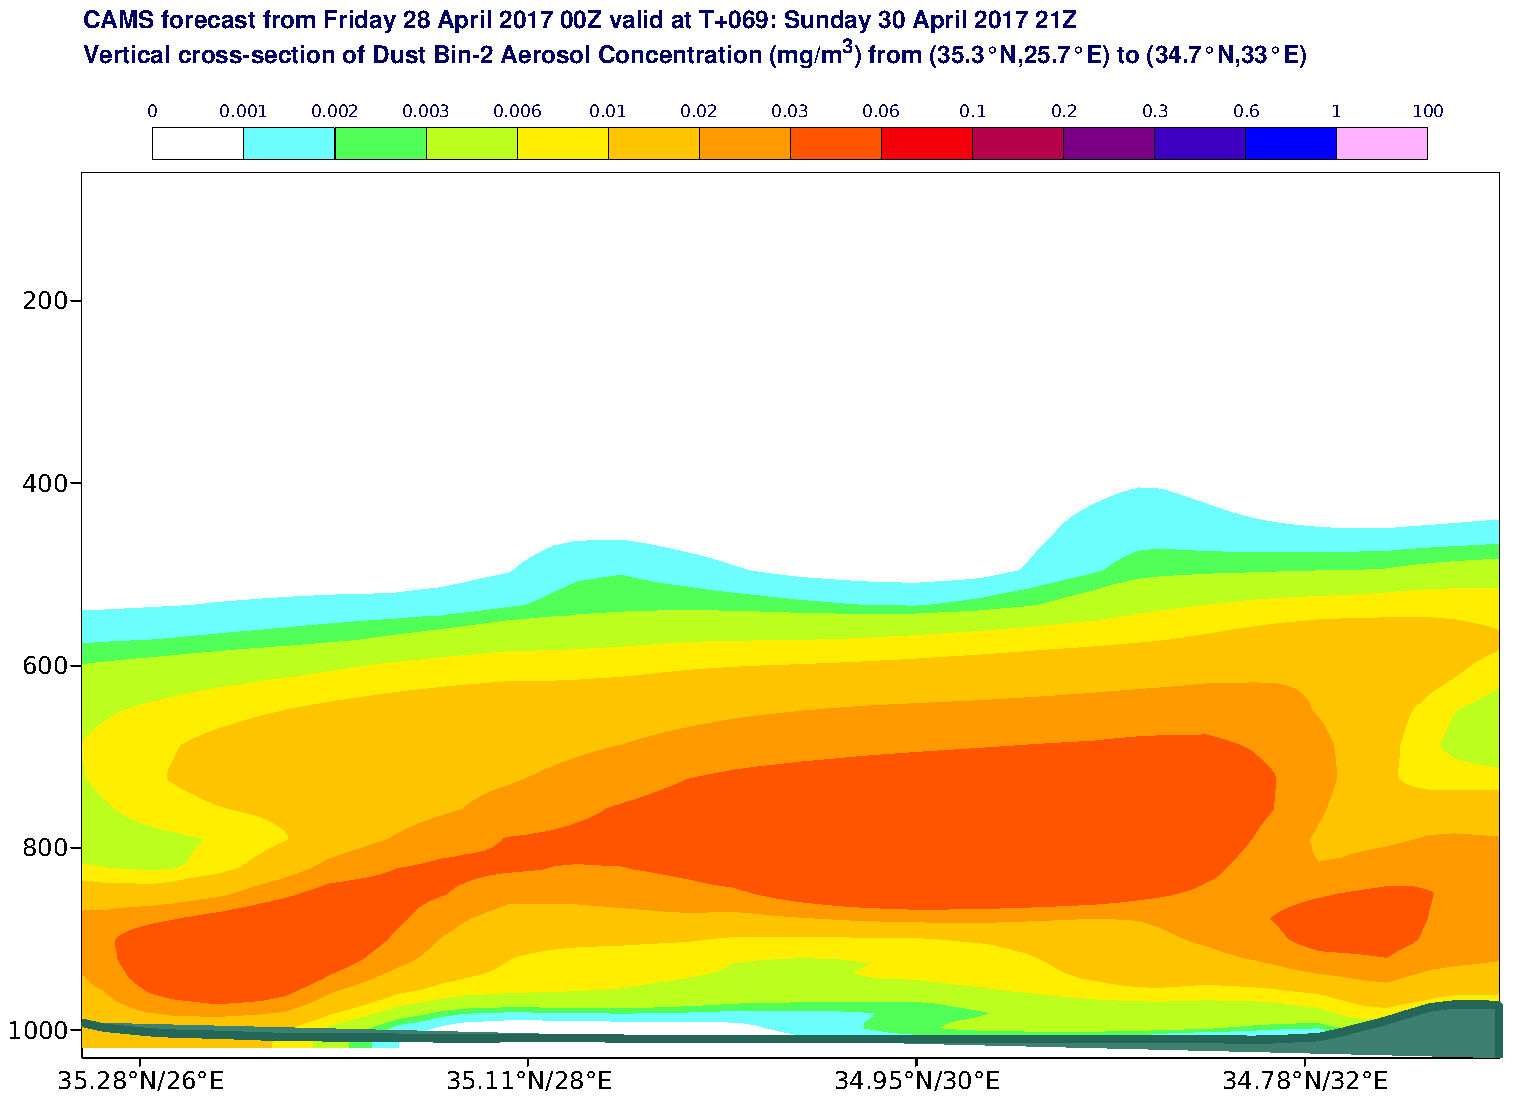 Vertical cross-section of Dust Bin-2 Aerosol Concentration (mg/m3) valid at T69 - 2017-04-30 21:00